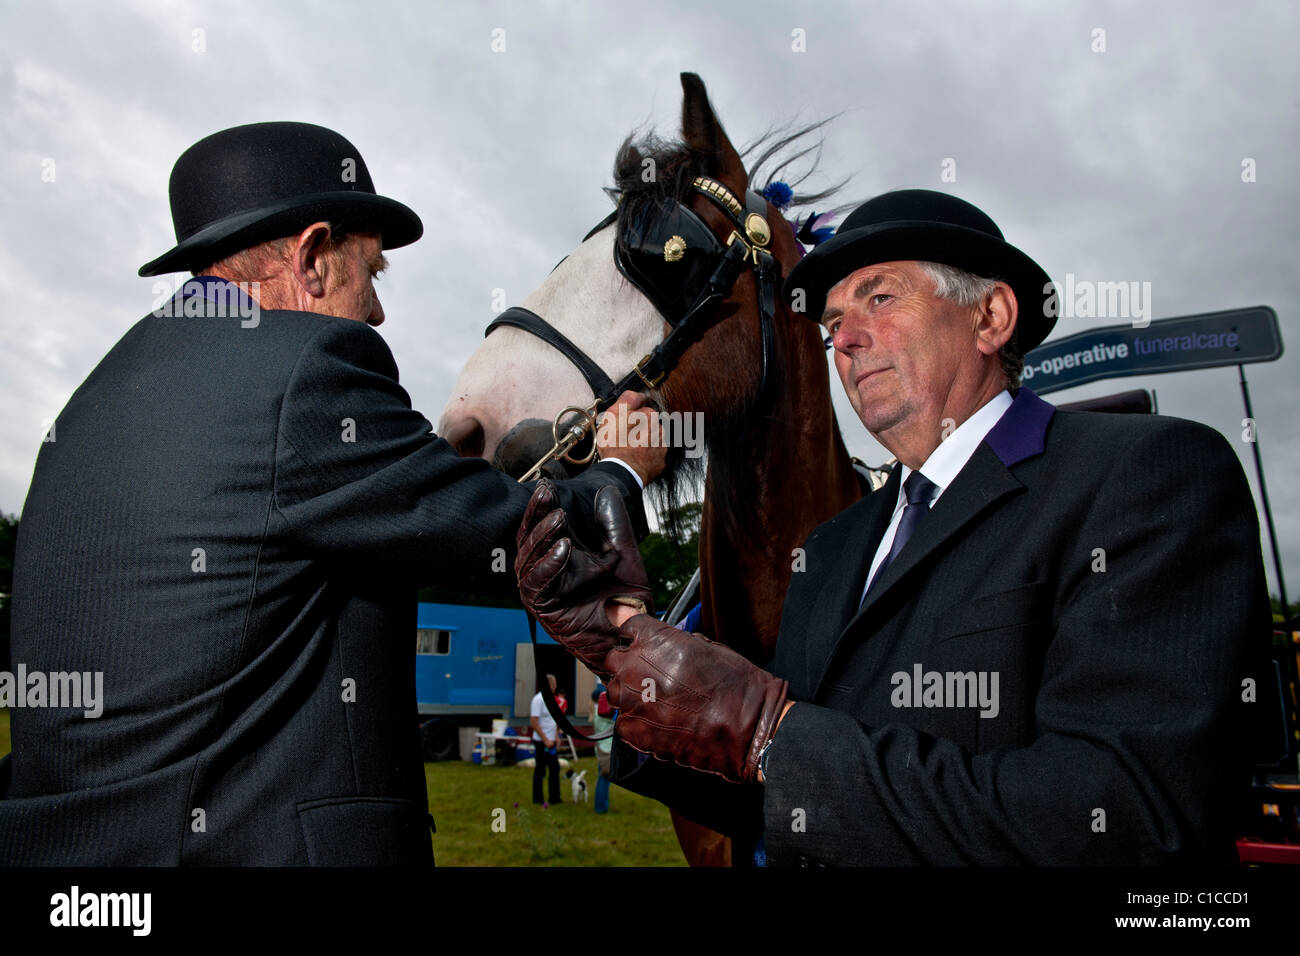 Funeral directors with Shire horses Stock Photo